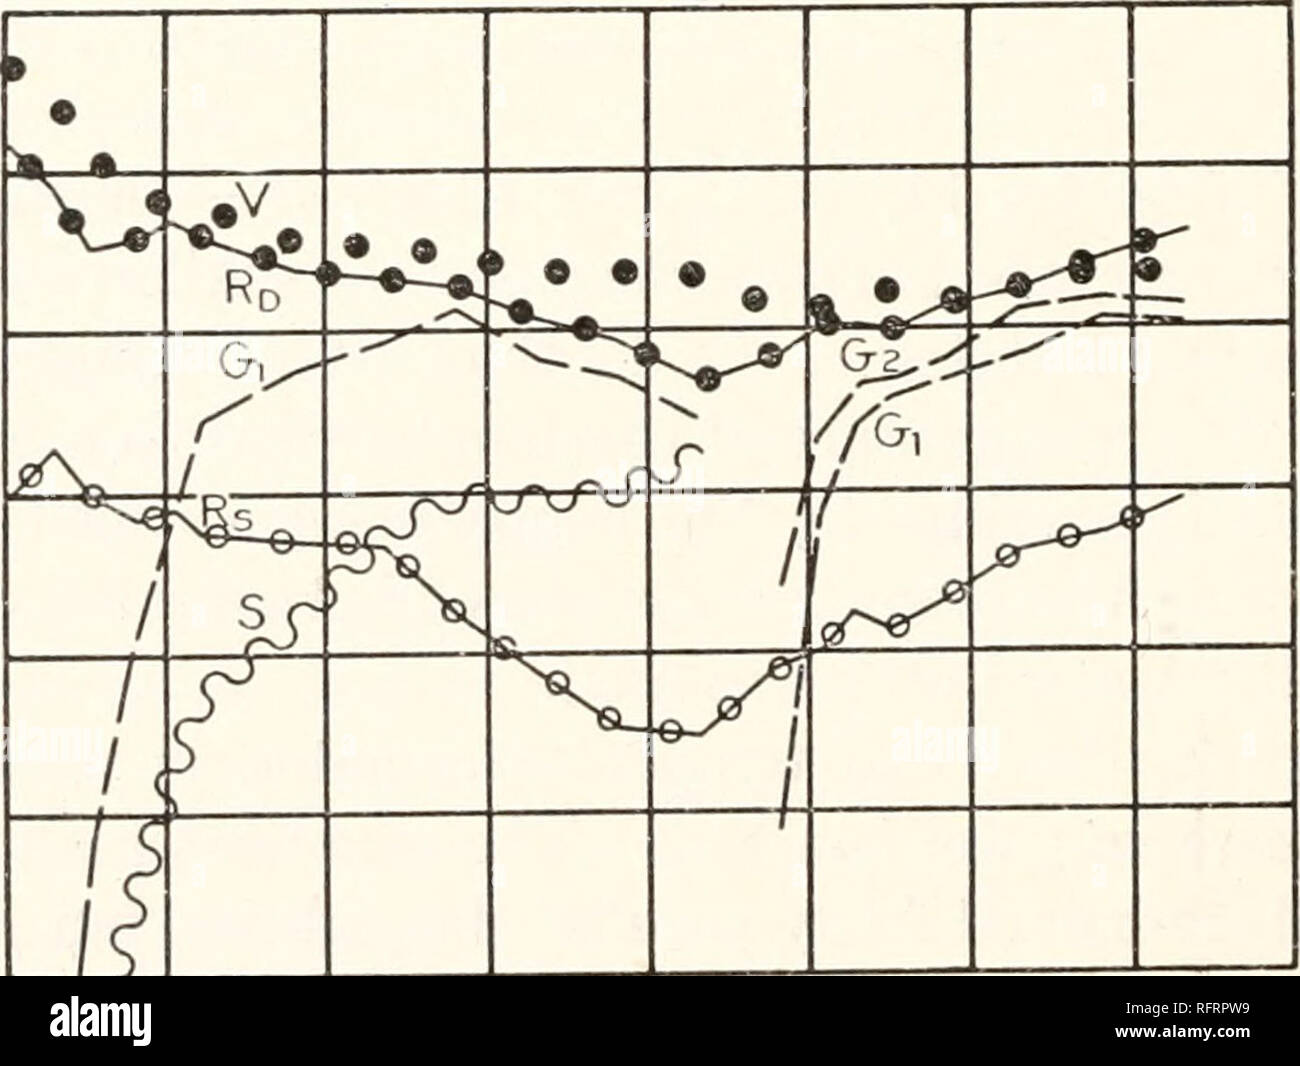 . Carnegie Institution of Washington publication. 54 TEMPERATURE FLUCTUATIONS IN THE HUMAN BODY. were unsuccessful, and the locality does not appear favorable for such observa- tions, as its use involves much discomfort to the subject. The records obtained in this experiment are given in fig. 23, the curves being designated as usual, that for the artificial cavity between the crossed legs being marked L. 37.4Â°C 37 2 370 368 366 364 36.2 36.0 35.8 V  CD *N, f*&quot;*^ â *â a i Â® Â® He A'i* Â® 3 &quot;^V 9 ^ Â®i ^Â® &gt; Â® Â® * HF Â£ Â® Â»A*A 4*. A A Â® &quot; a Â° ft A 4 â &quot; Â® 110 PM. Stock Photo